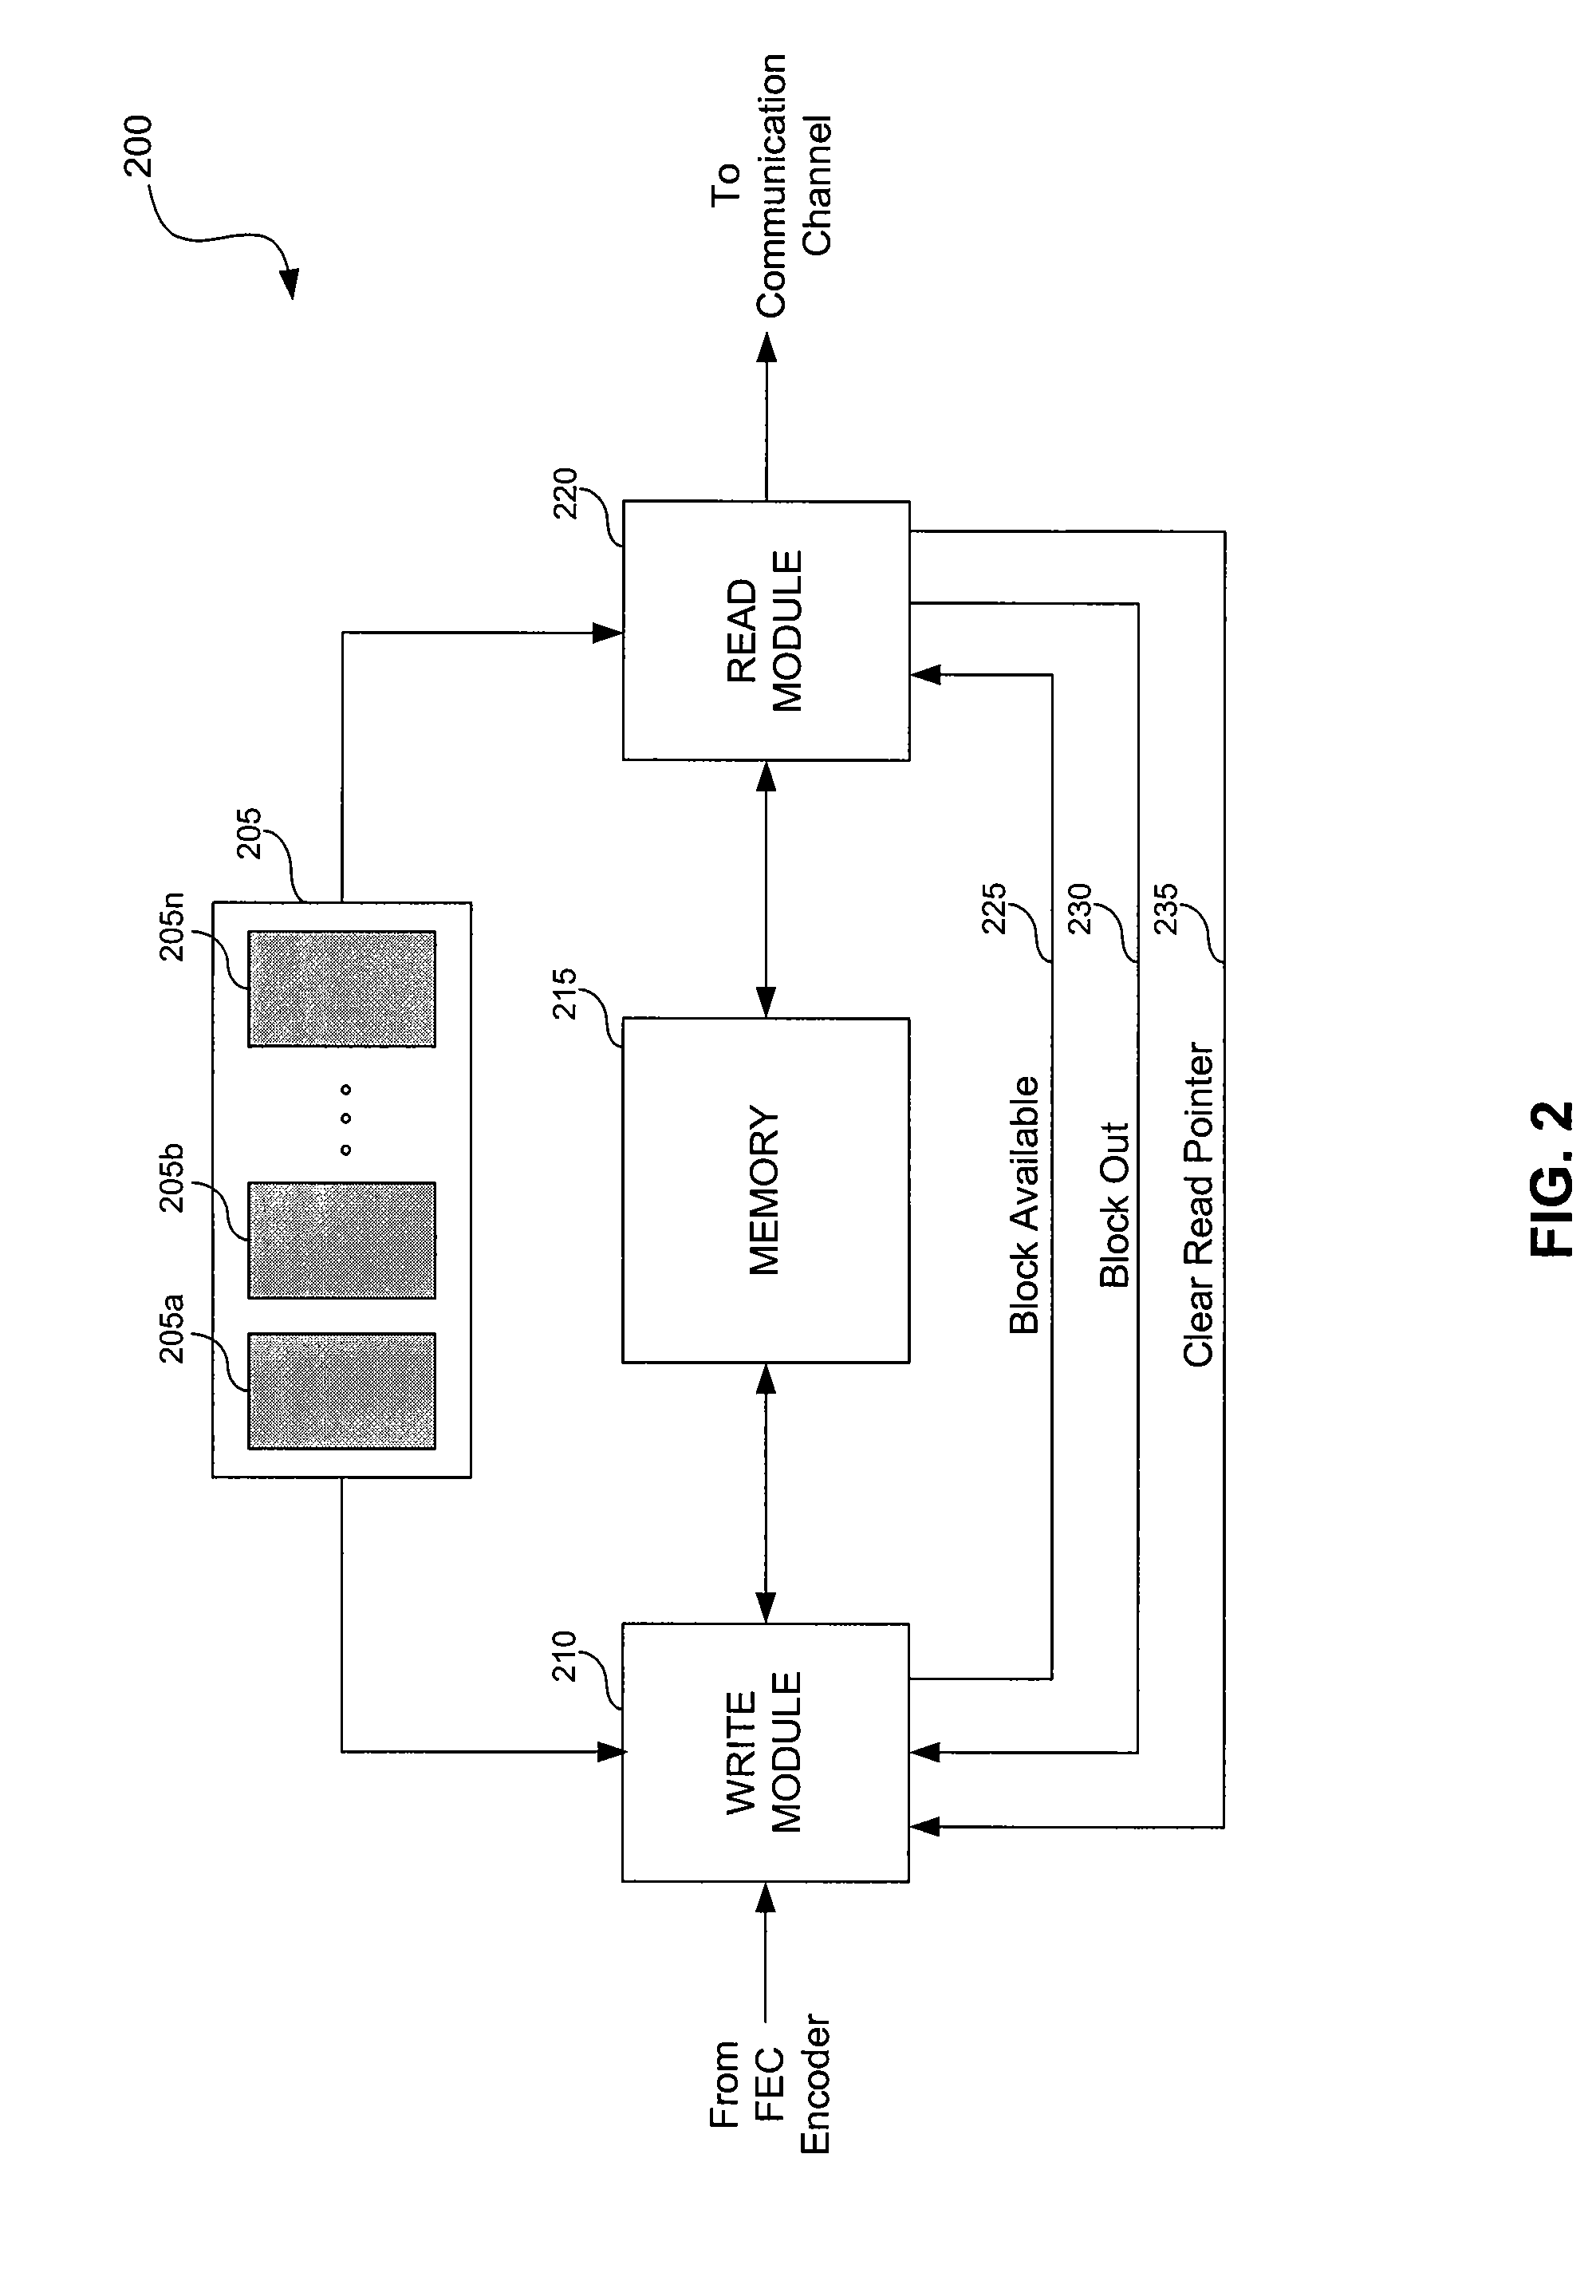 System and Method for Interleaving Data in a Communication Device